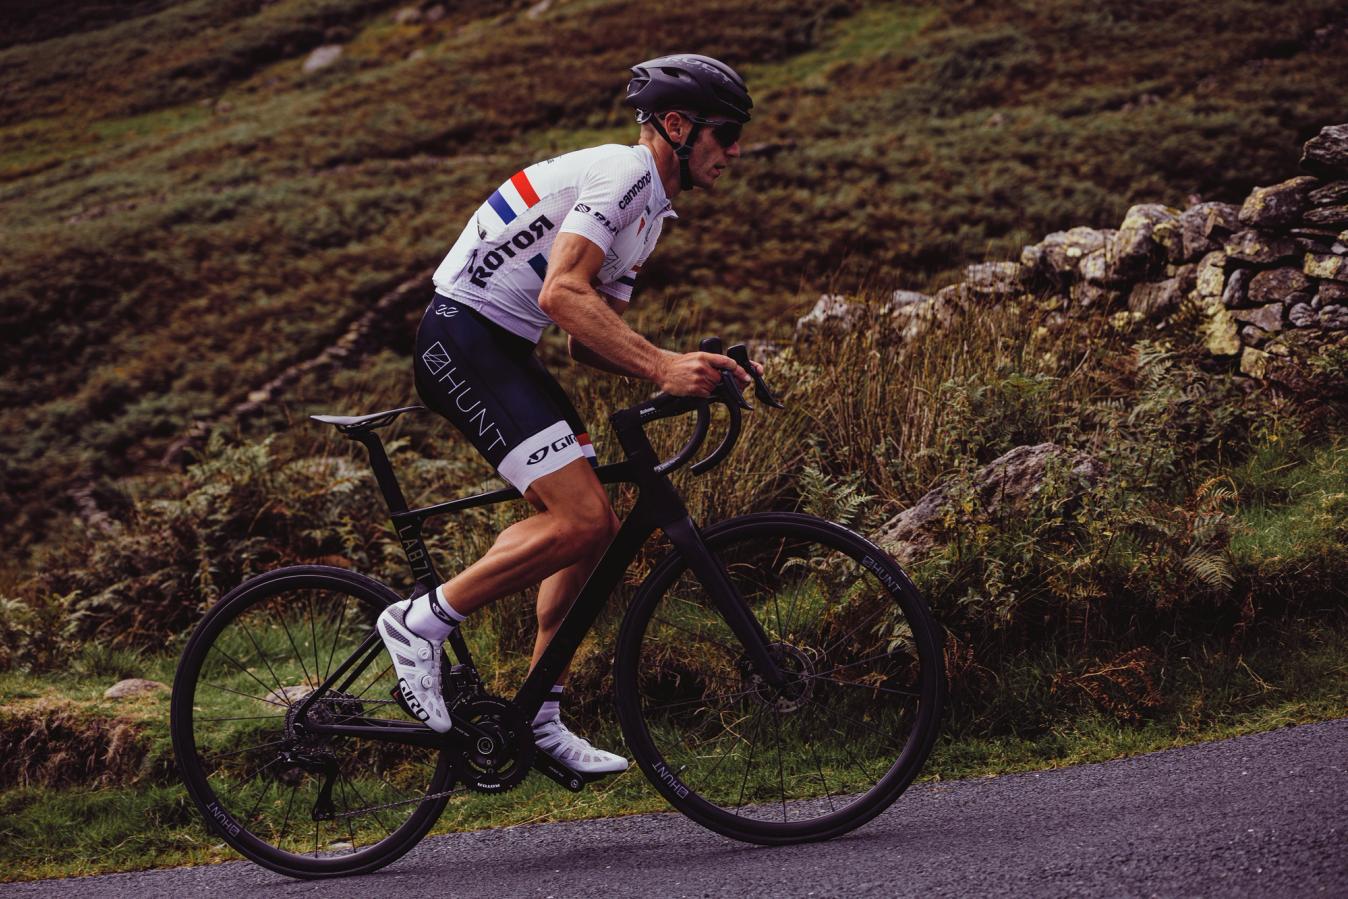 Hunt are a sponsor of current national hill climb champion Andrew Feather, who will be using these wheels when he defends his title later in the season